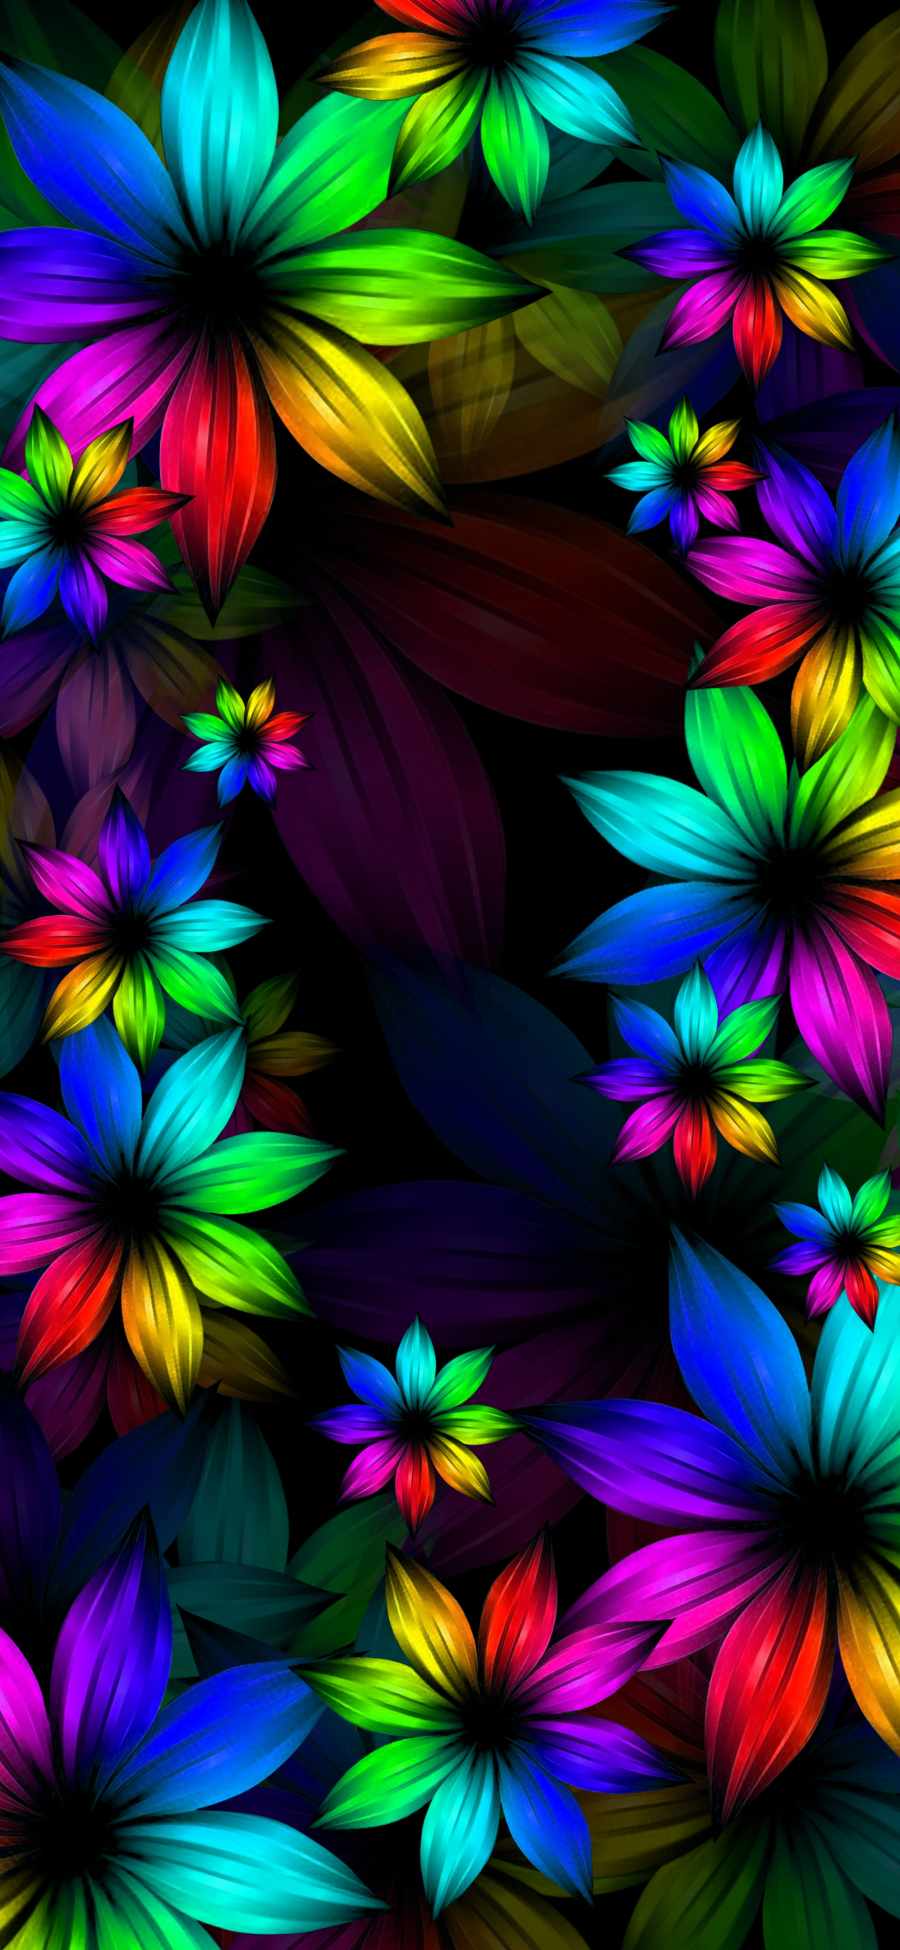 Rainbow Color Flowers IPhone Wallpaper HD - IPhone Wallpapers : iPhone  Wallpapers